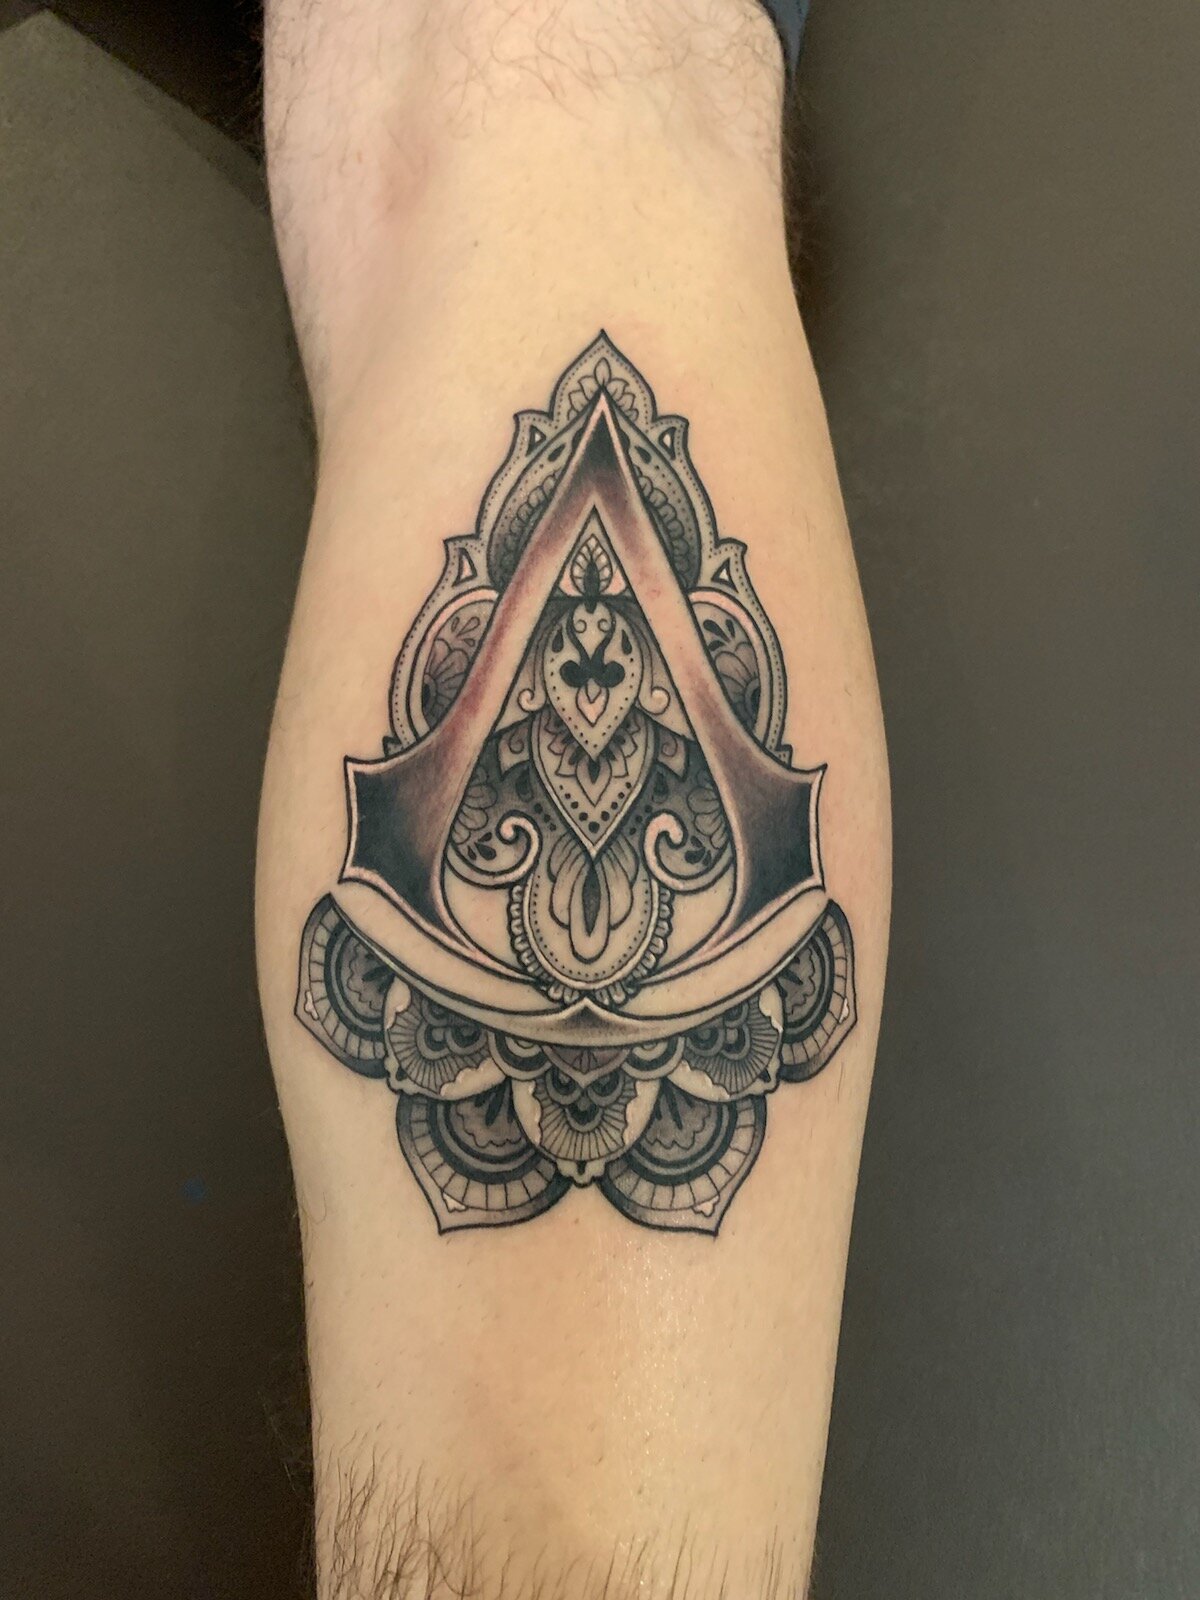 From Blades To Brotherhood The Artistry Of Assassins Creed Tattoo Designs   TATTOOGOTO